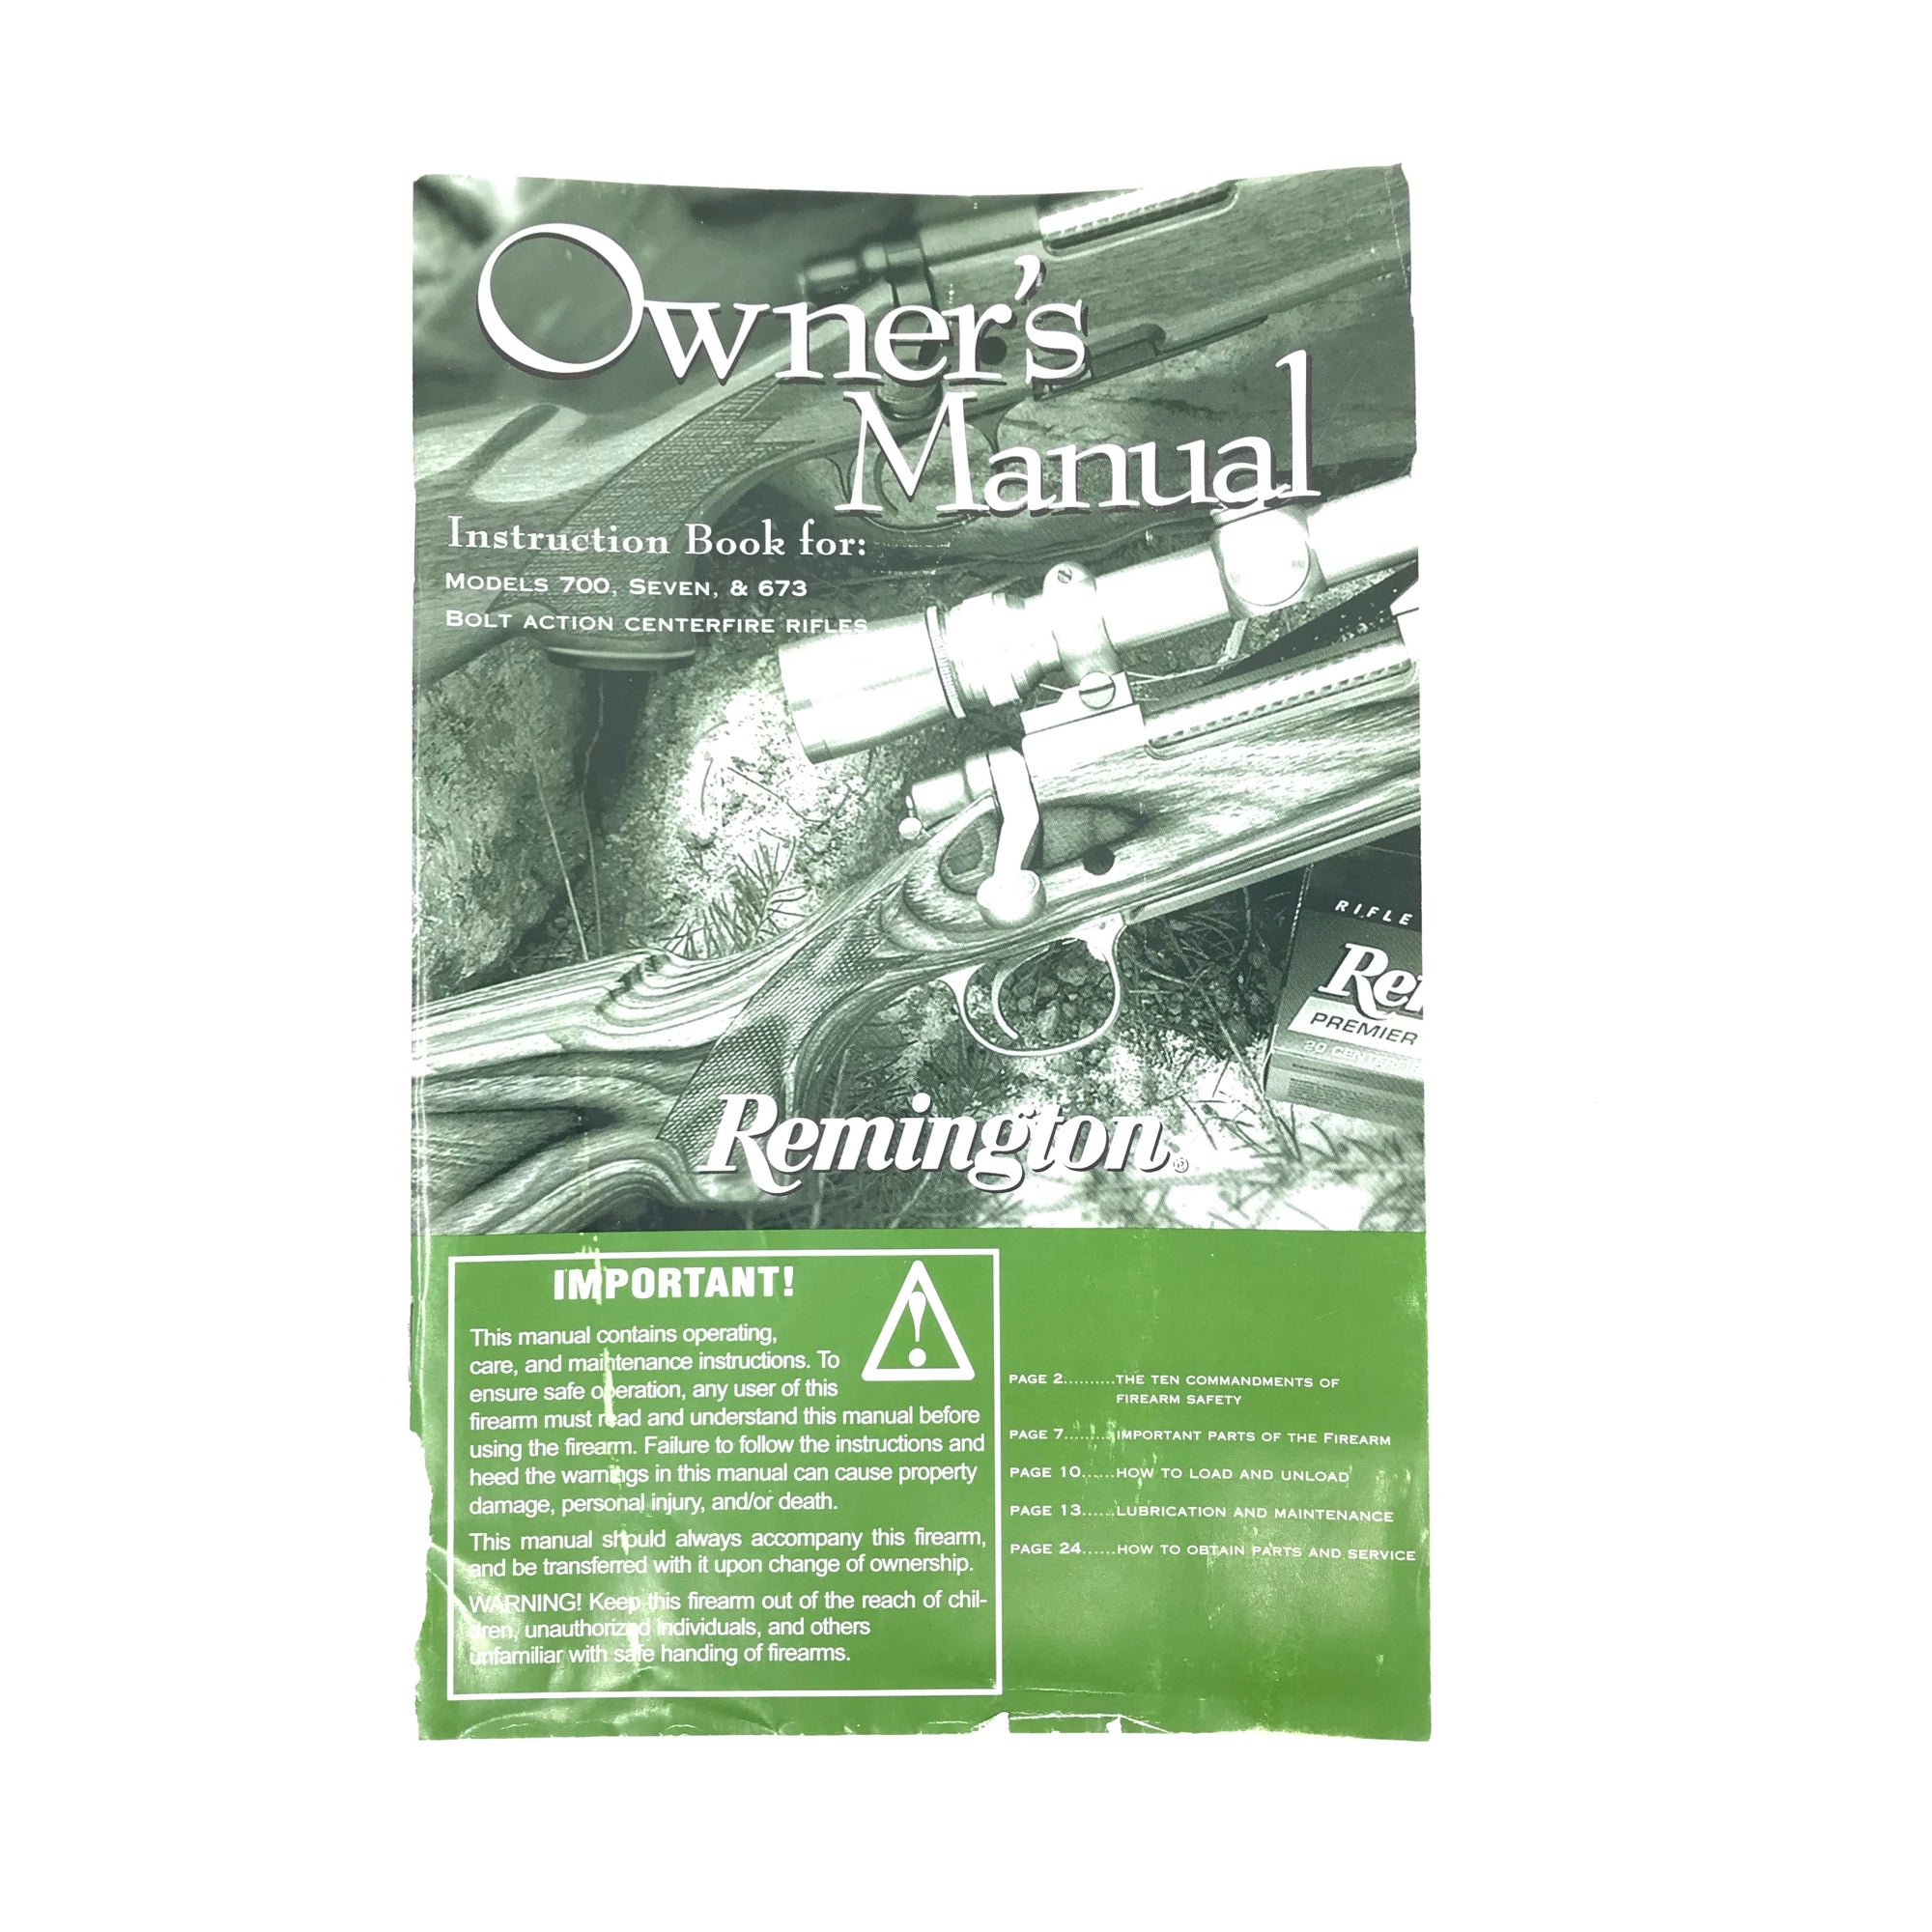 Remington Owner's Manual Instruction Book